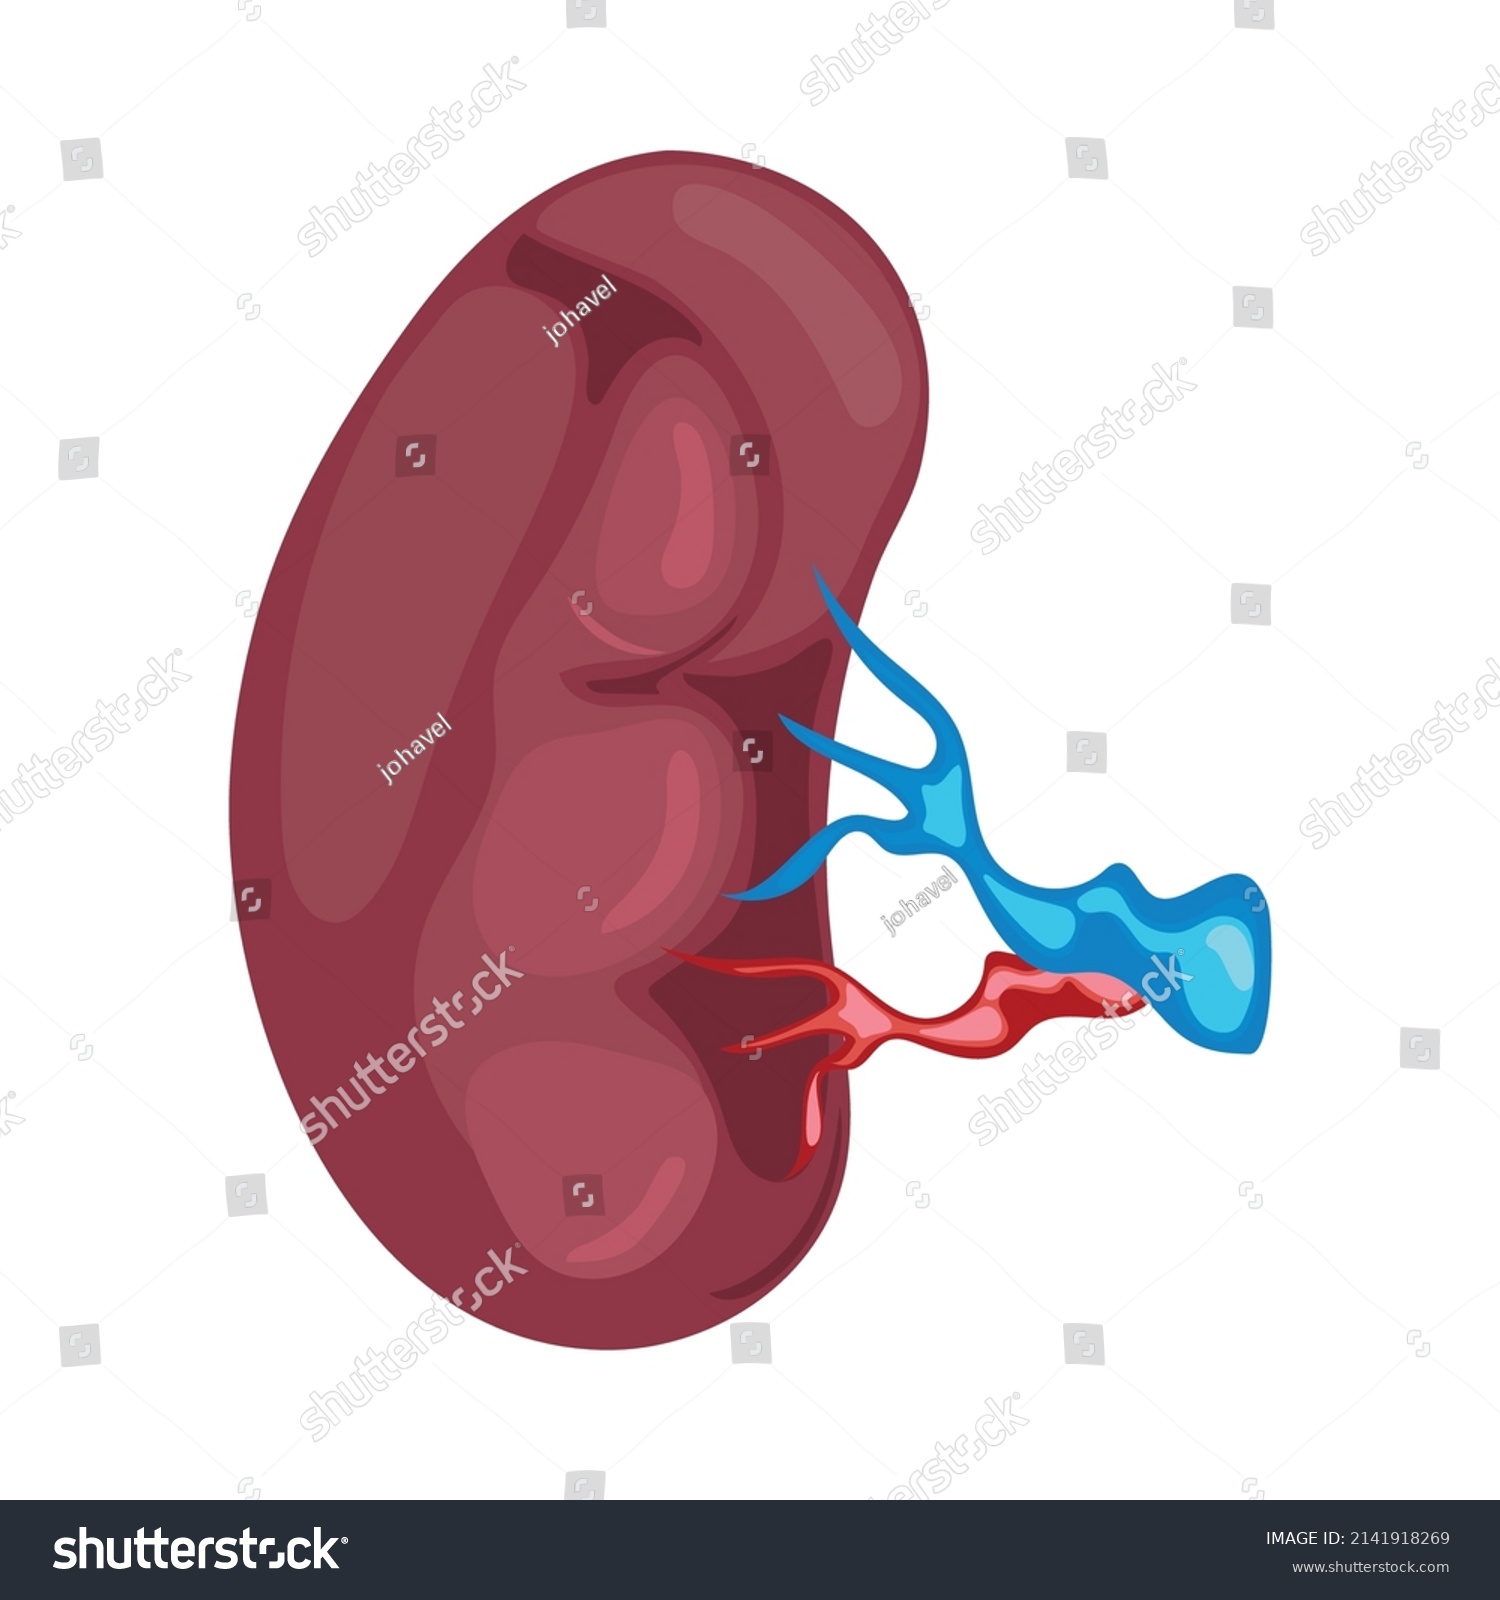 Kidney Human Body Part Icon Stock Vector (Royalty Free) 2141918269 ...